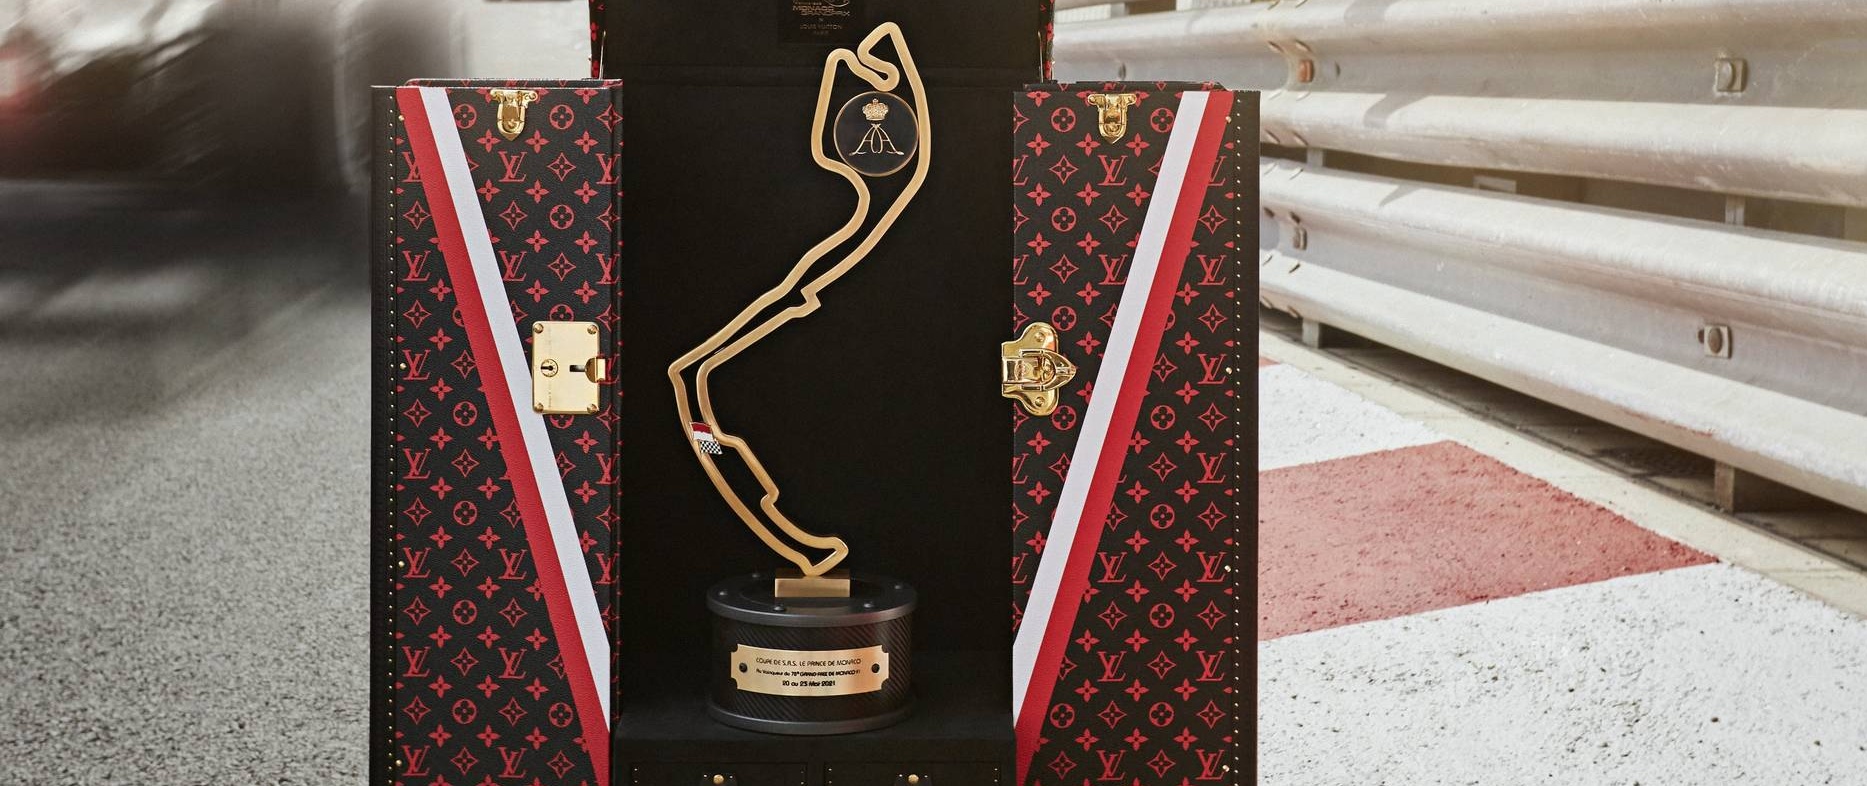 Louis Vuitton Presents The Trophy Trunk Case For The 80th F1 Grand Prix -  JetSet